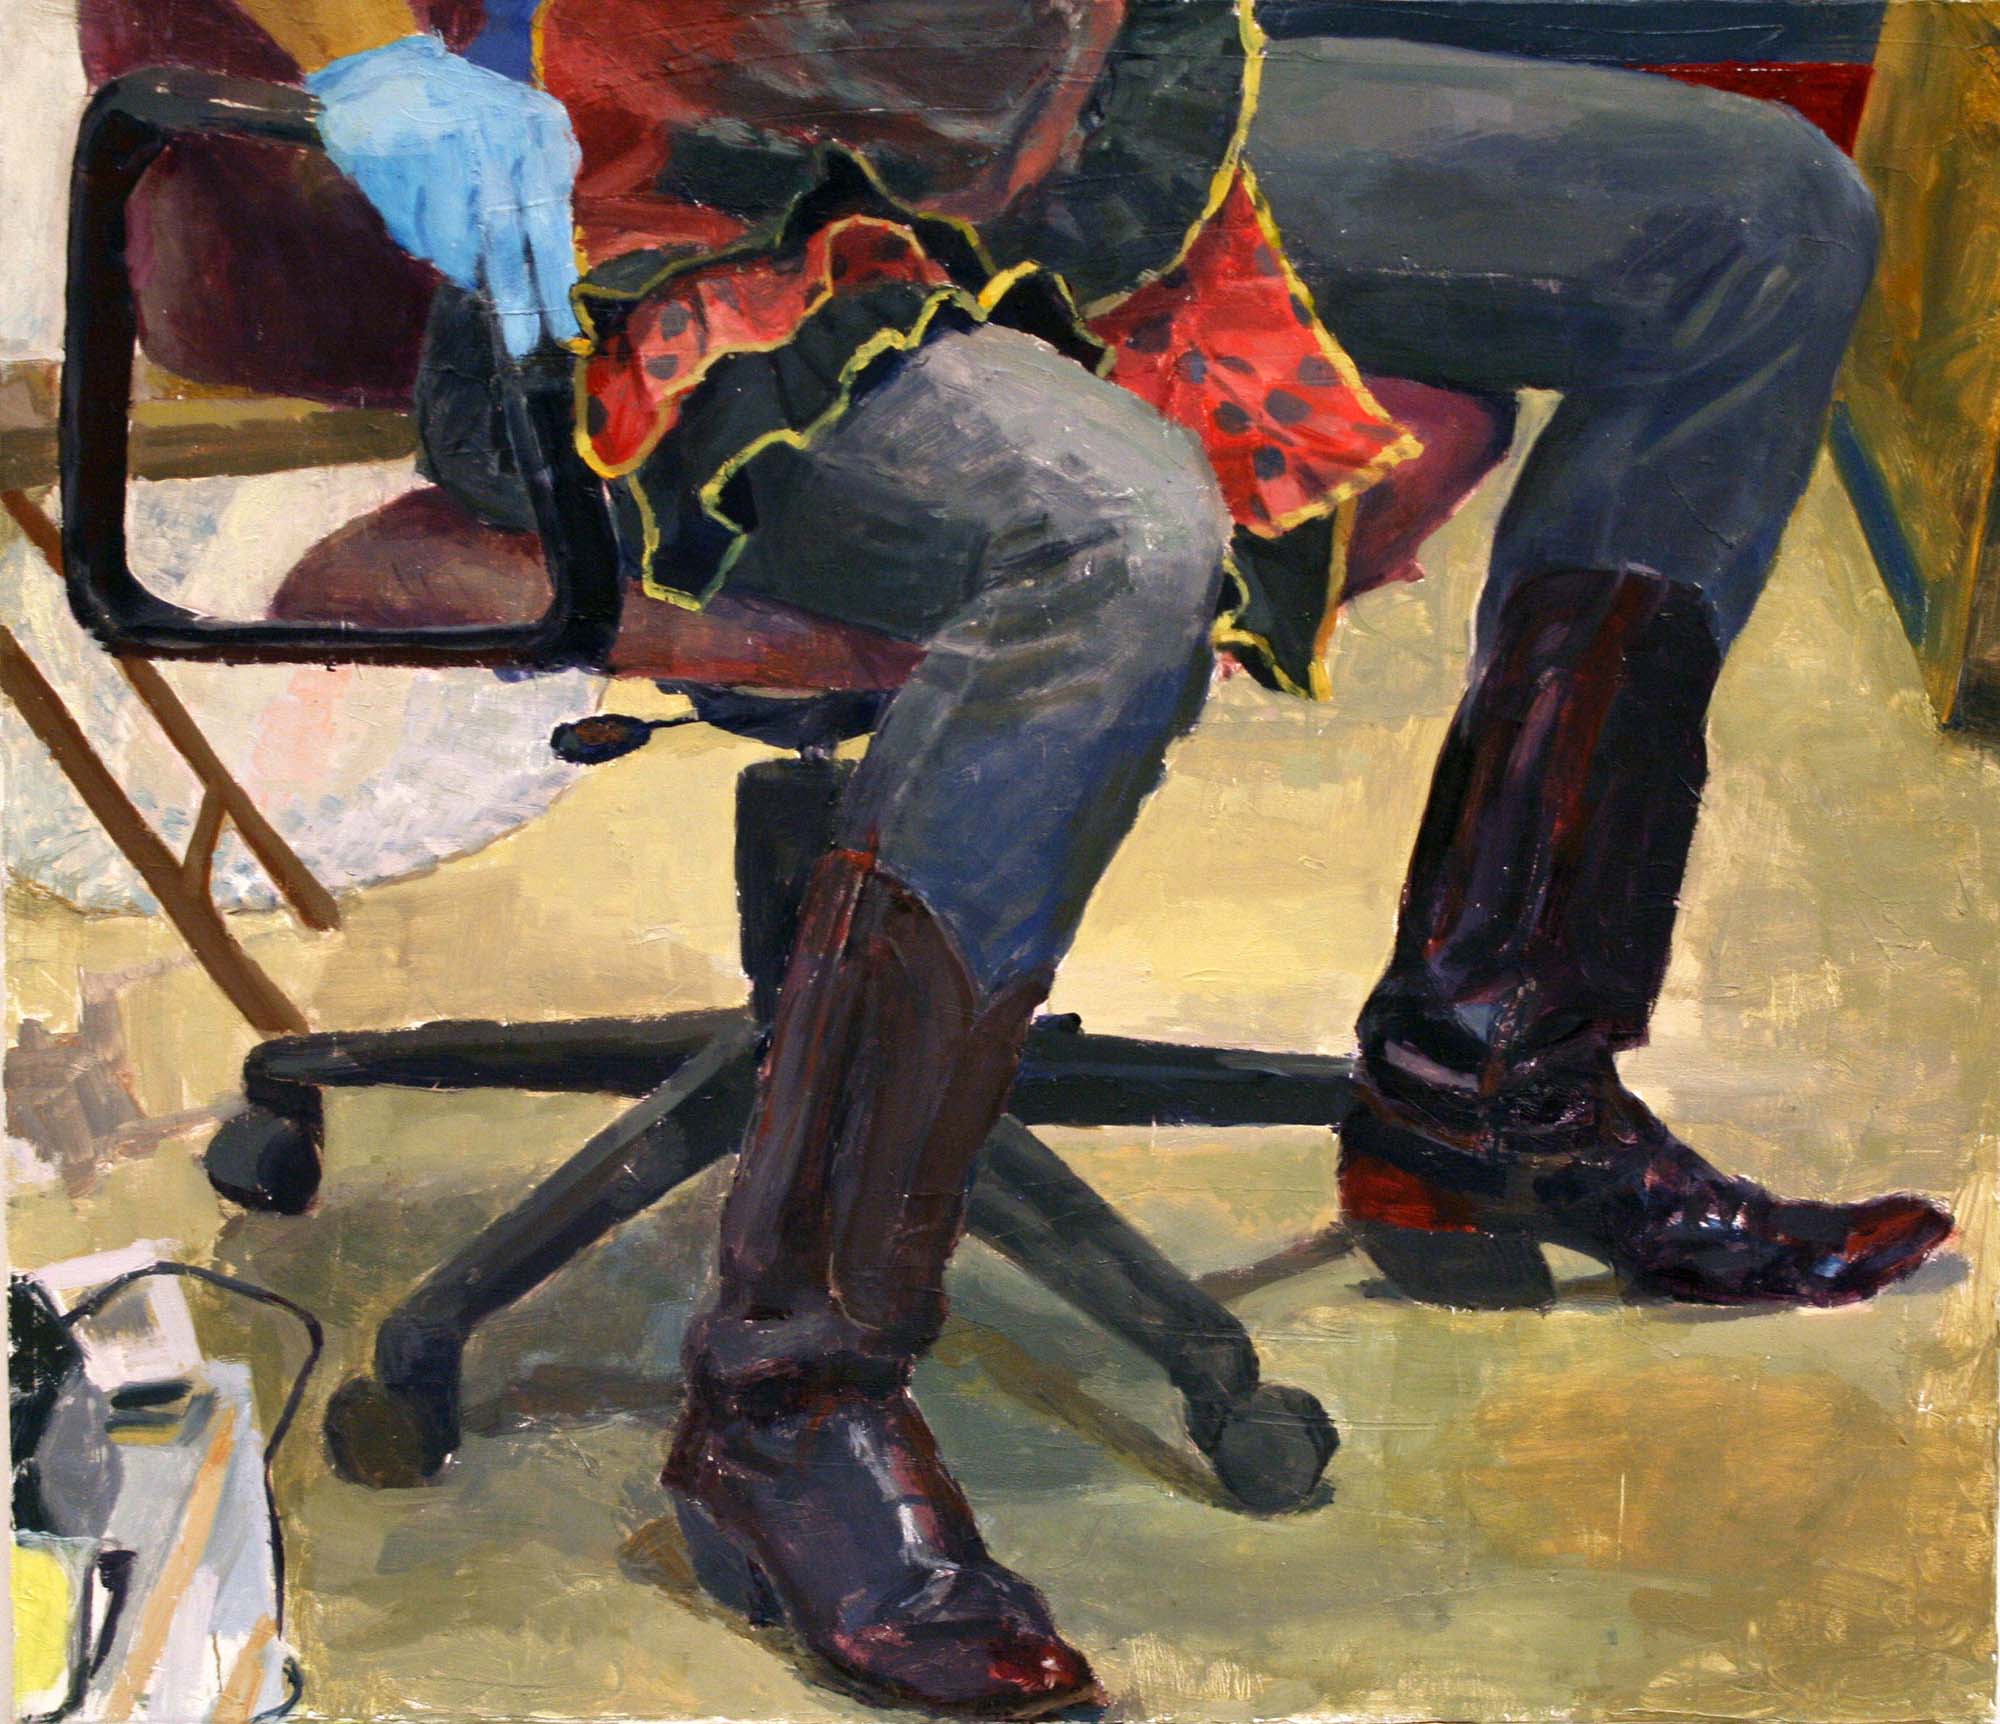   Cowboy Boots , 2009. Oil on canvas, 28 x 36" 